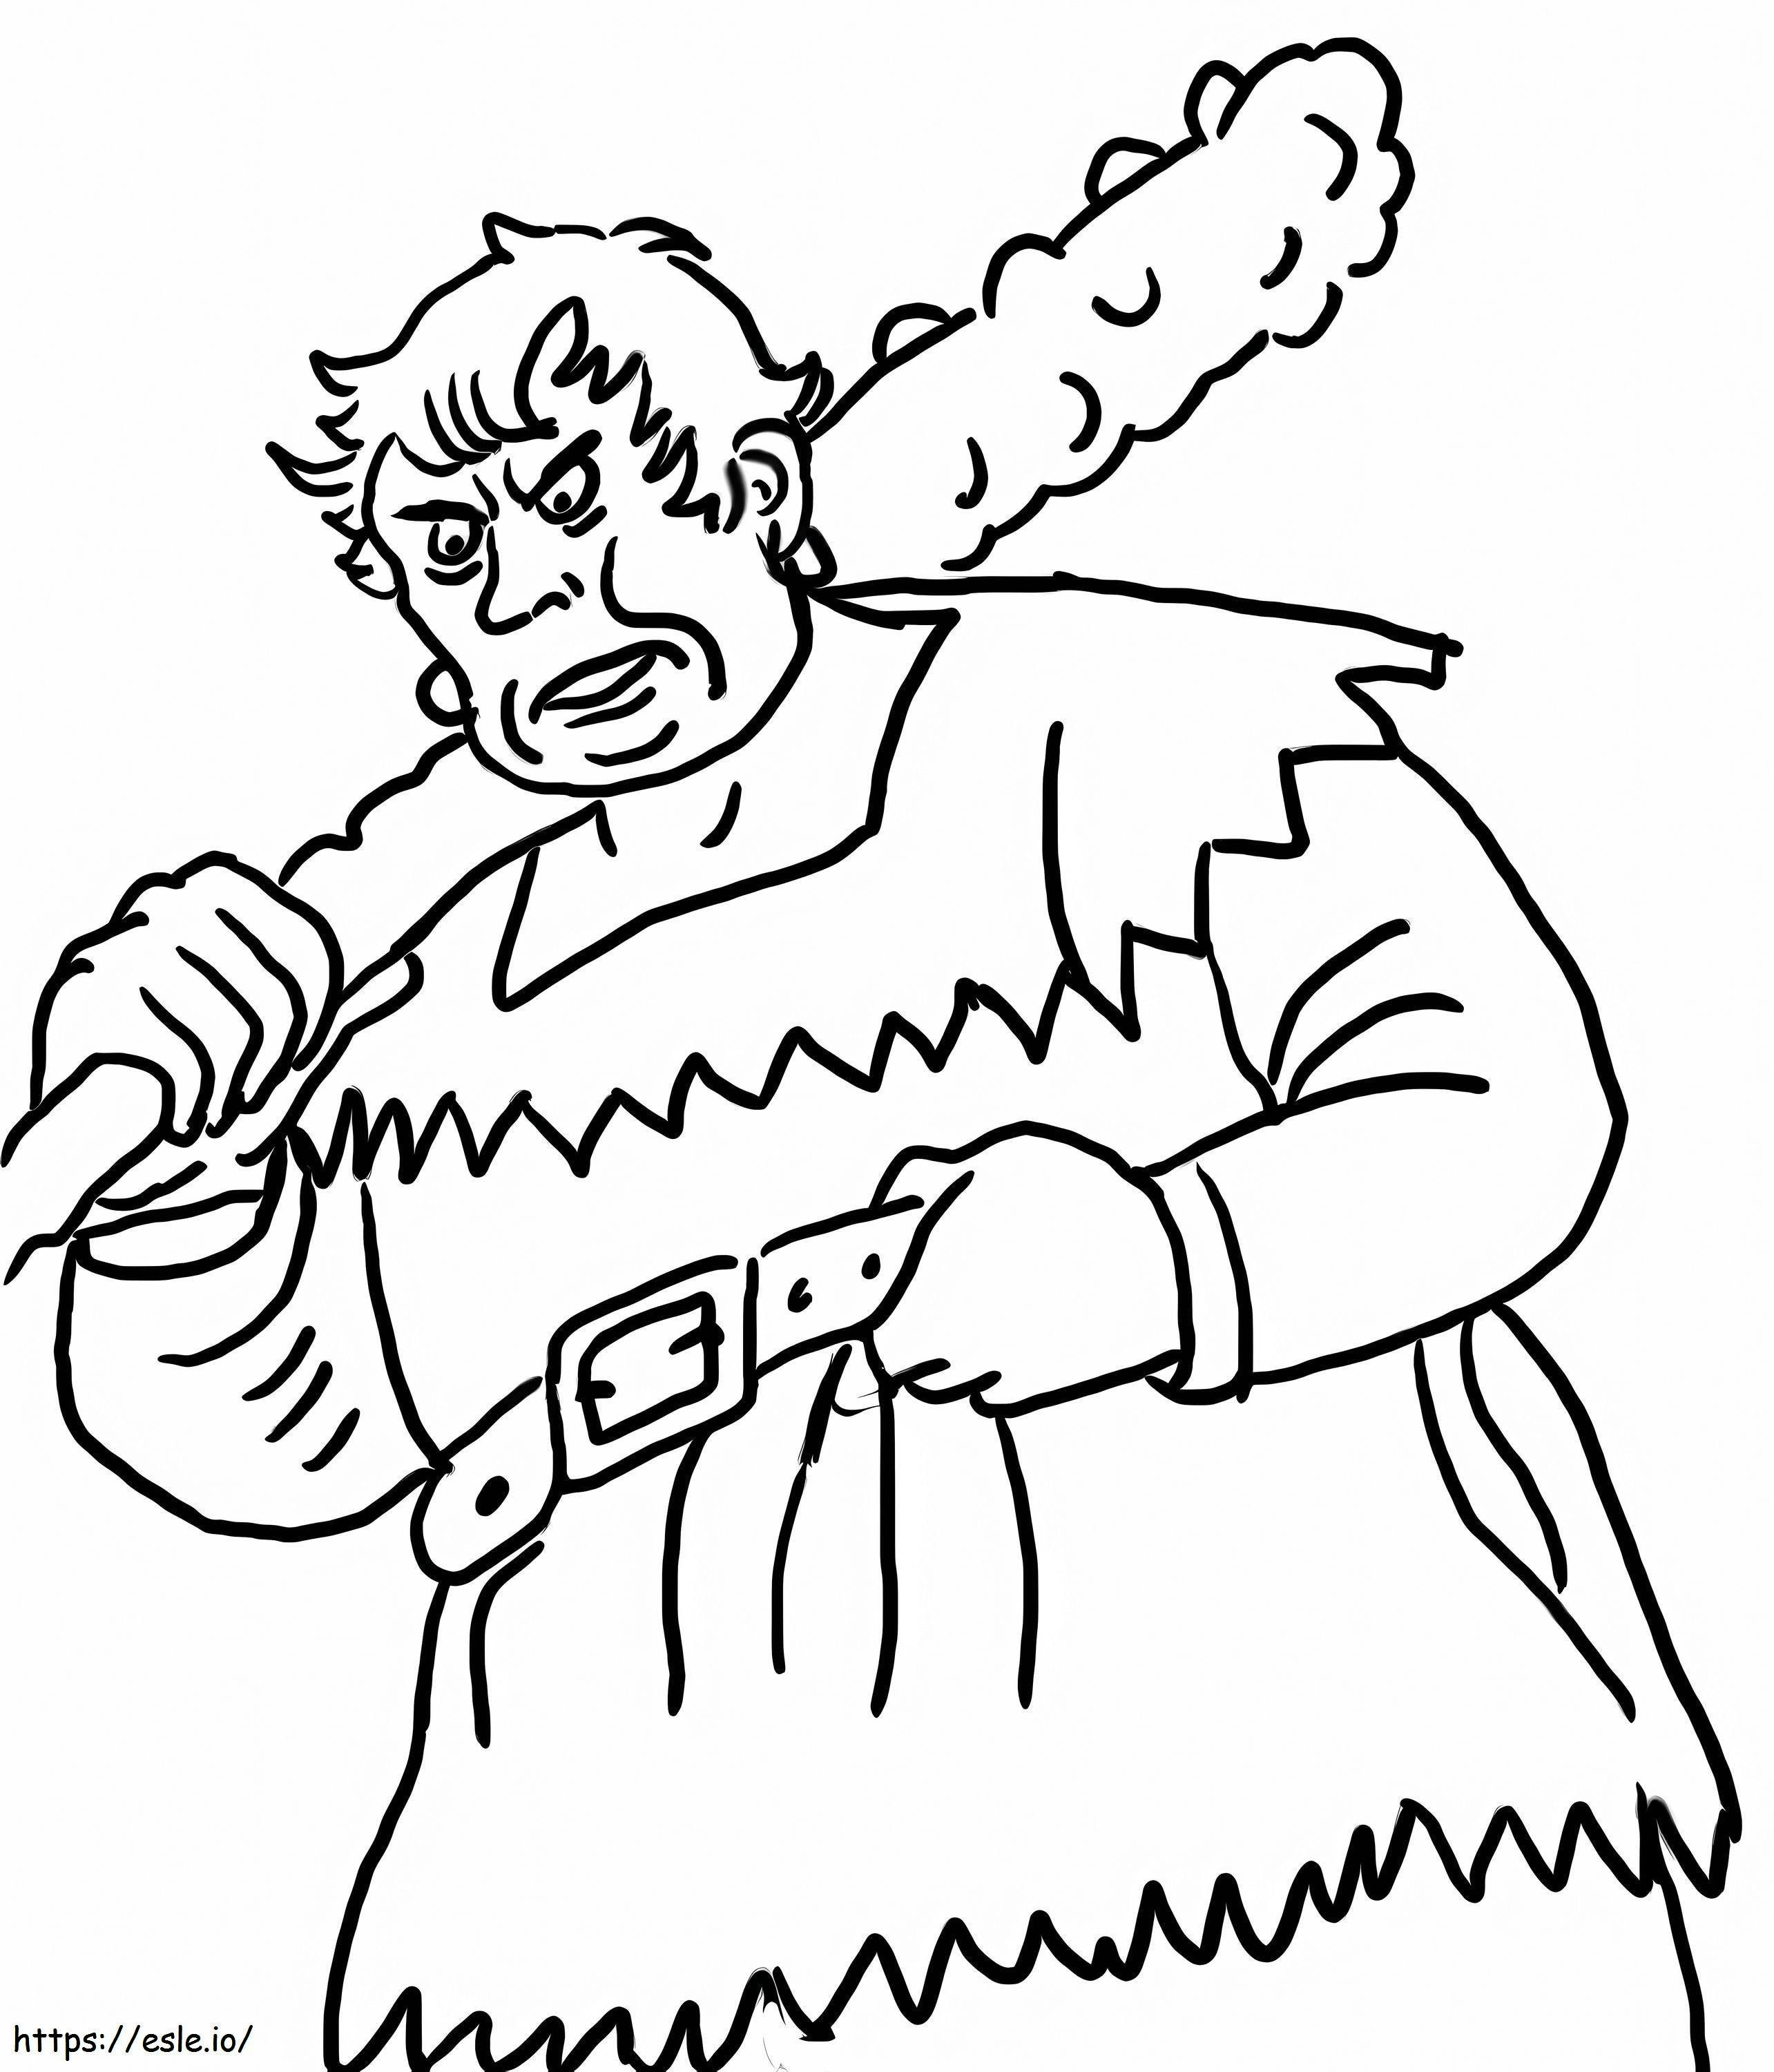 Giant Basic Drawing coloring page